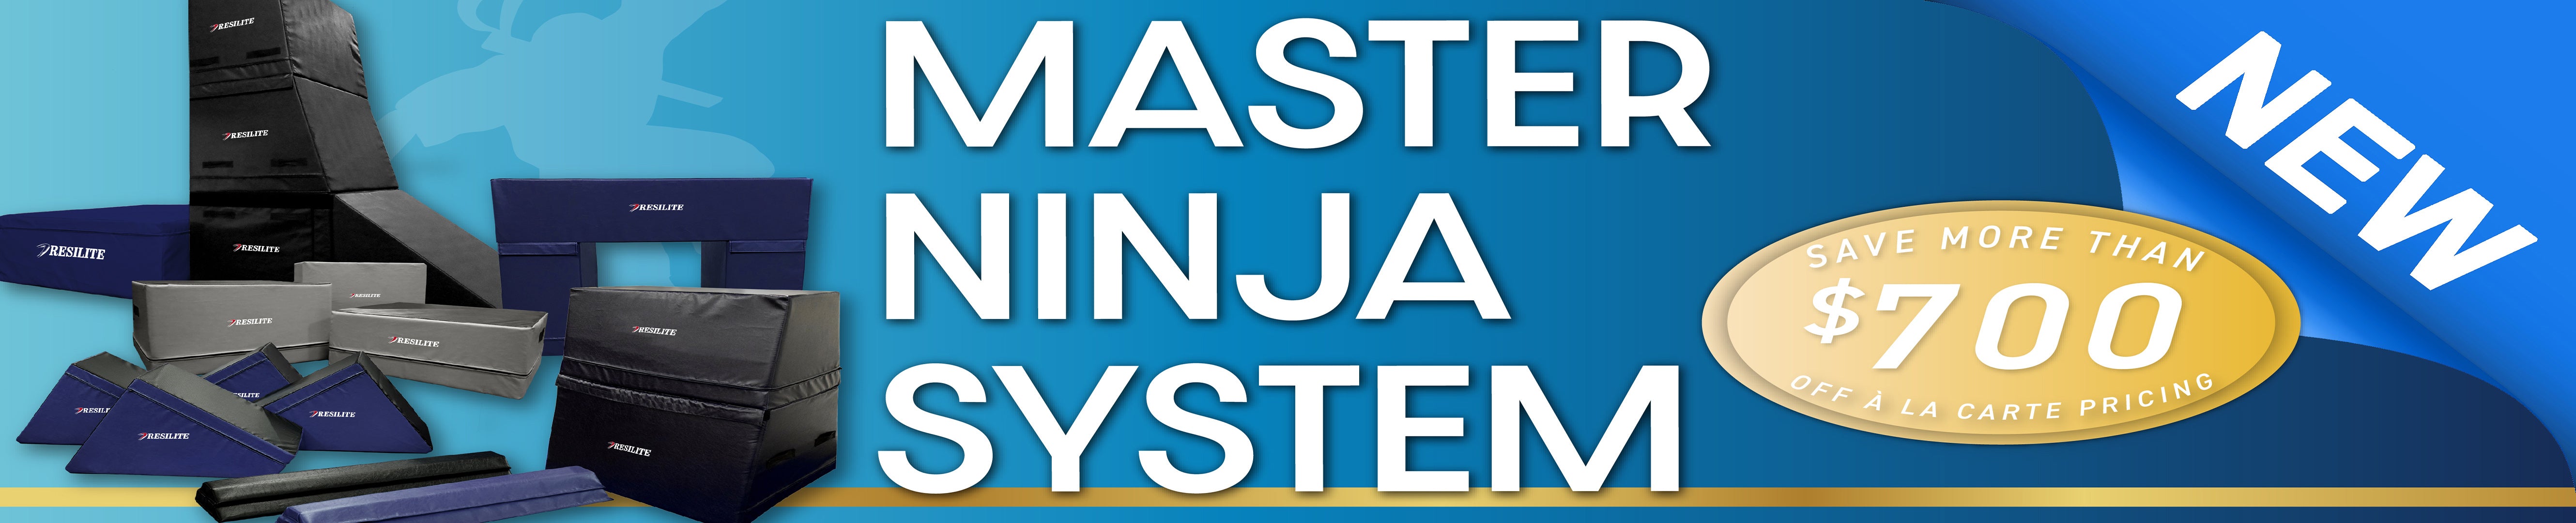 Save more than $700 on a la carte pricing with the Master Ninja System